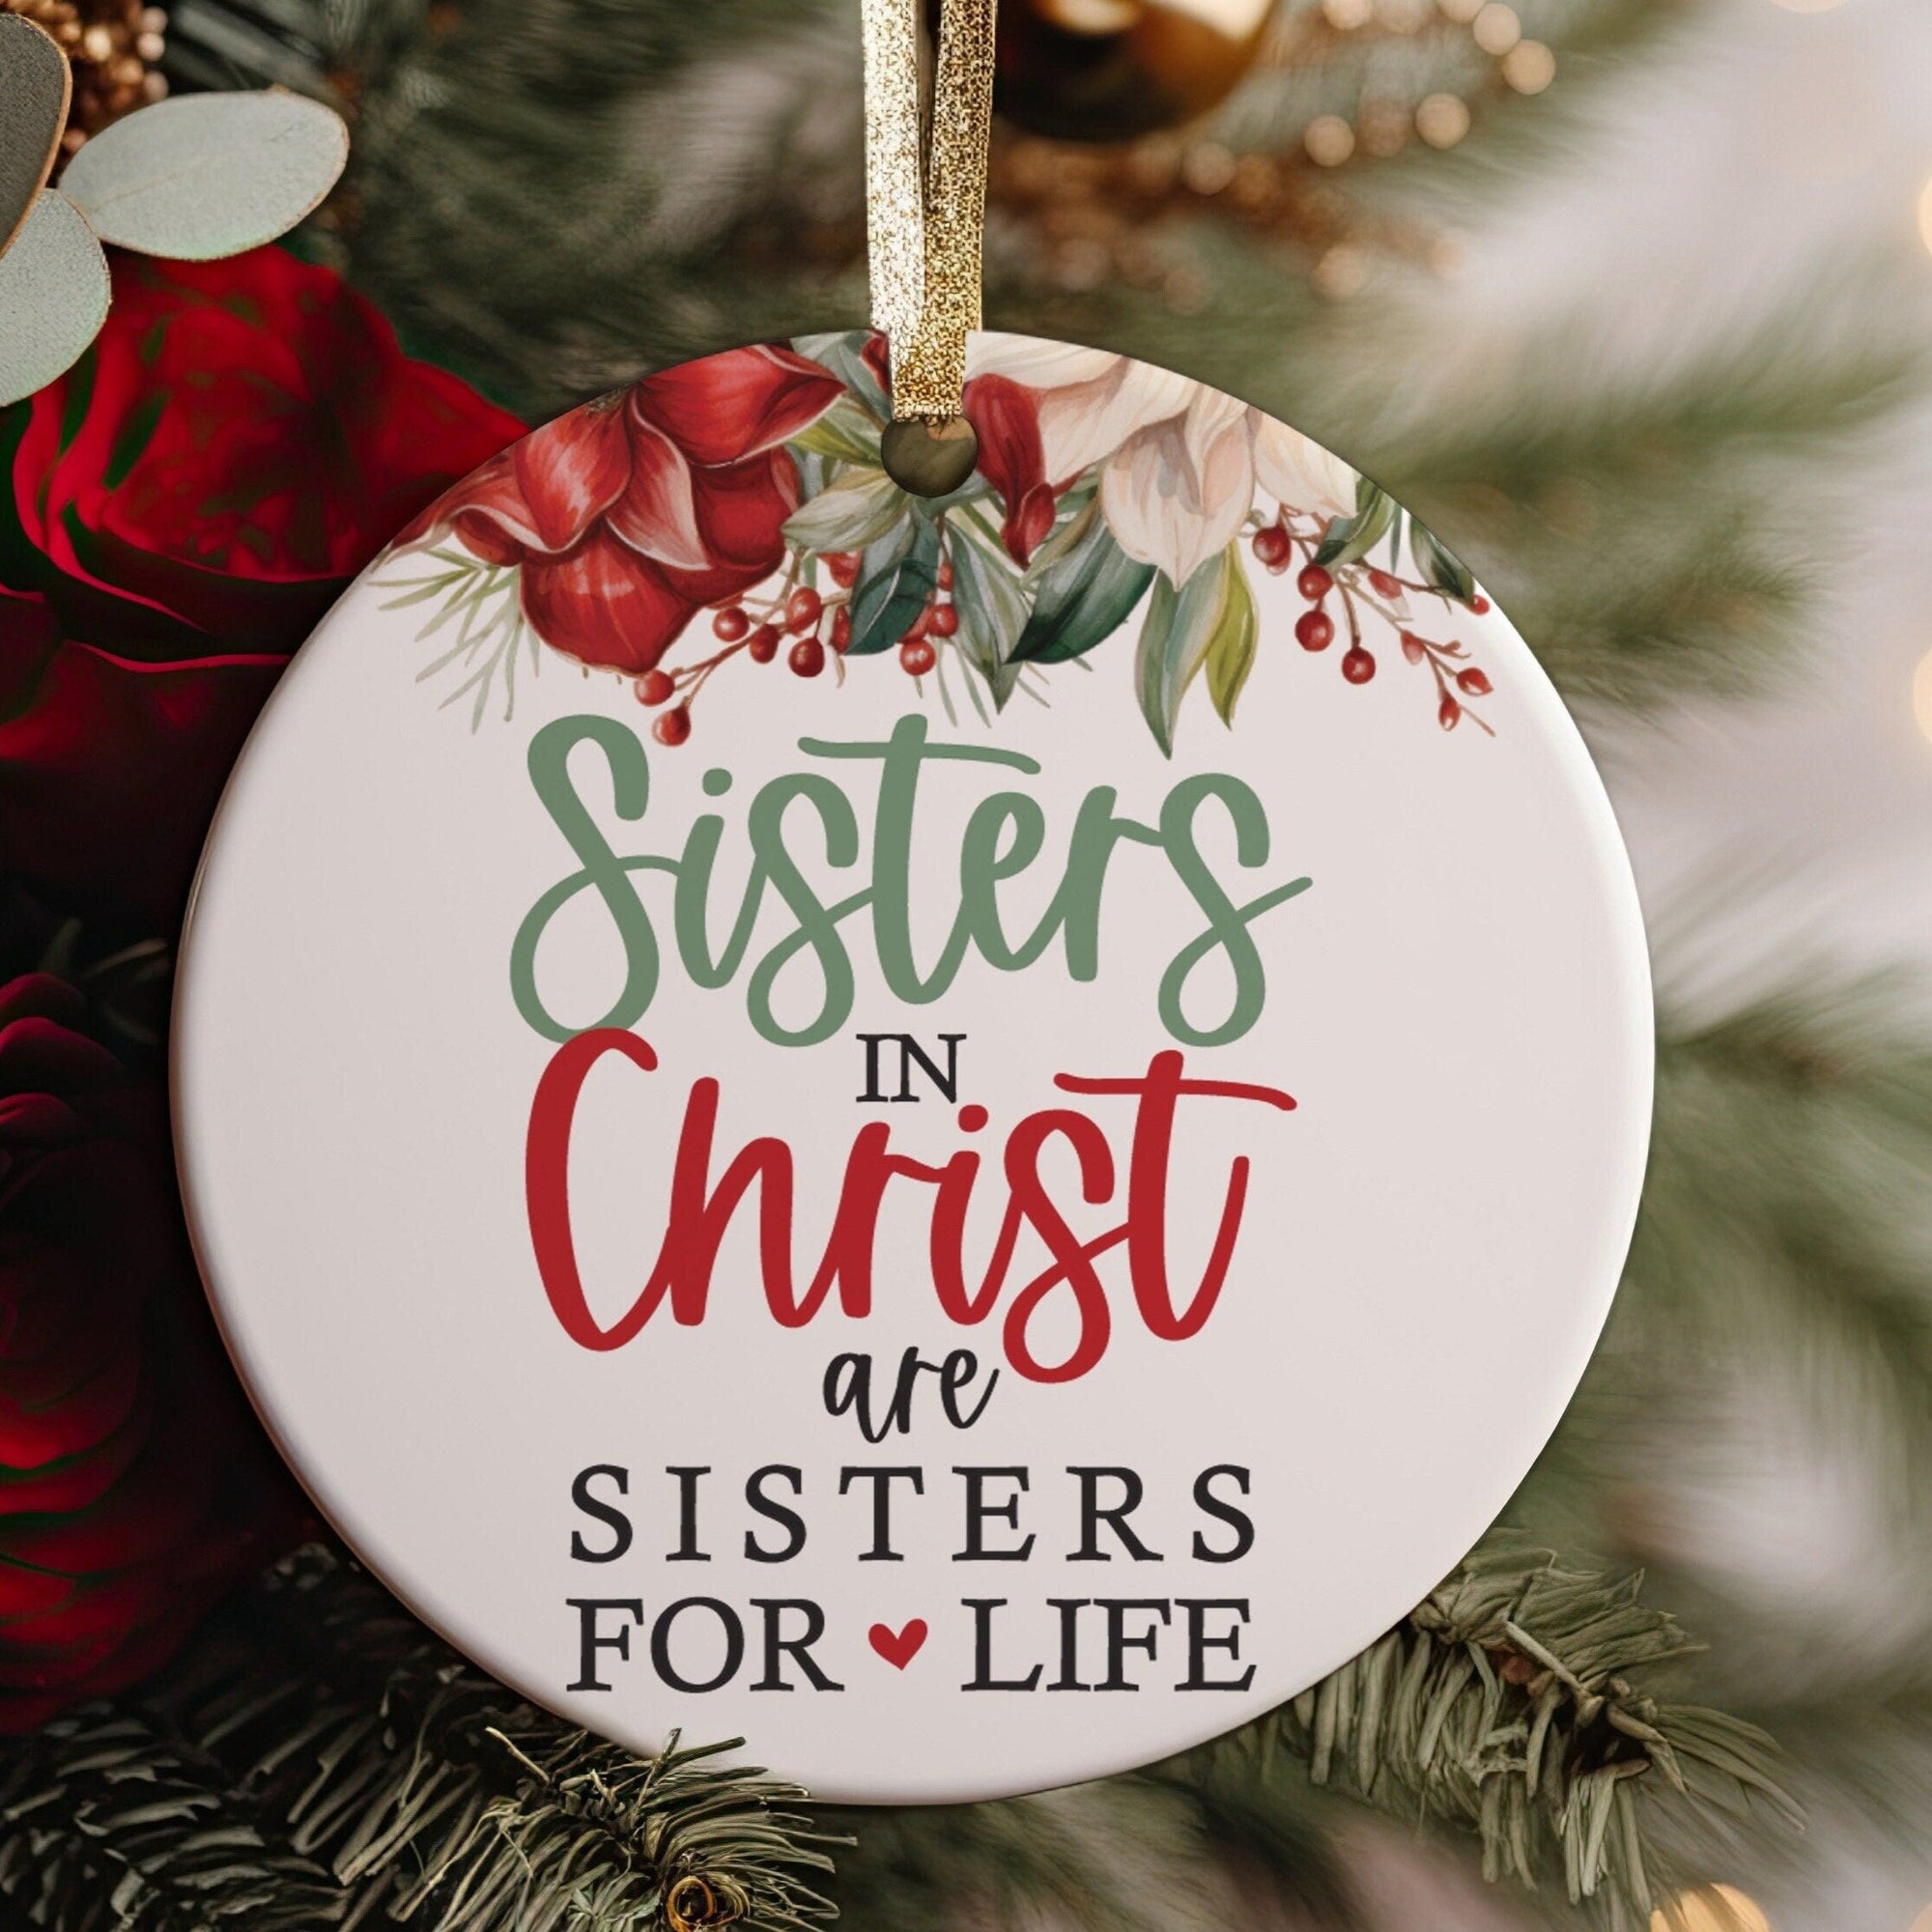 Sisters In Christ Christian Bible Study Group Best Friends or Besties Friendship BFF Ceramic Round Ornament Gift Idea, Free Gift Box